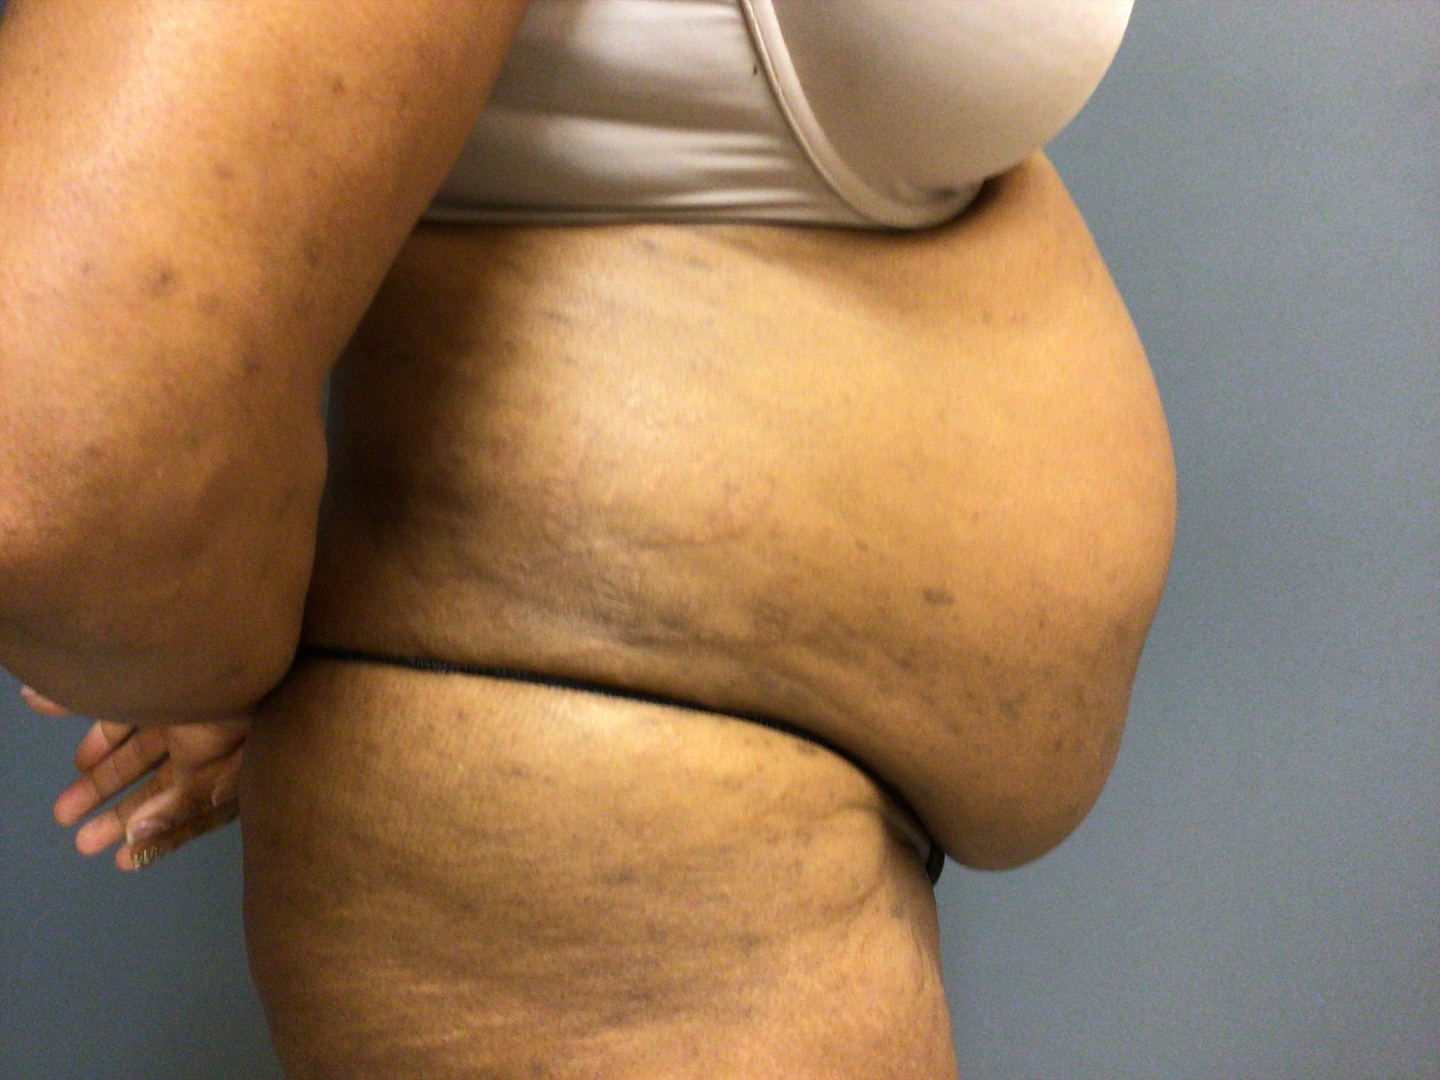 53 year old female right side before surgery